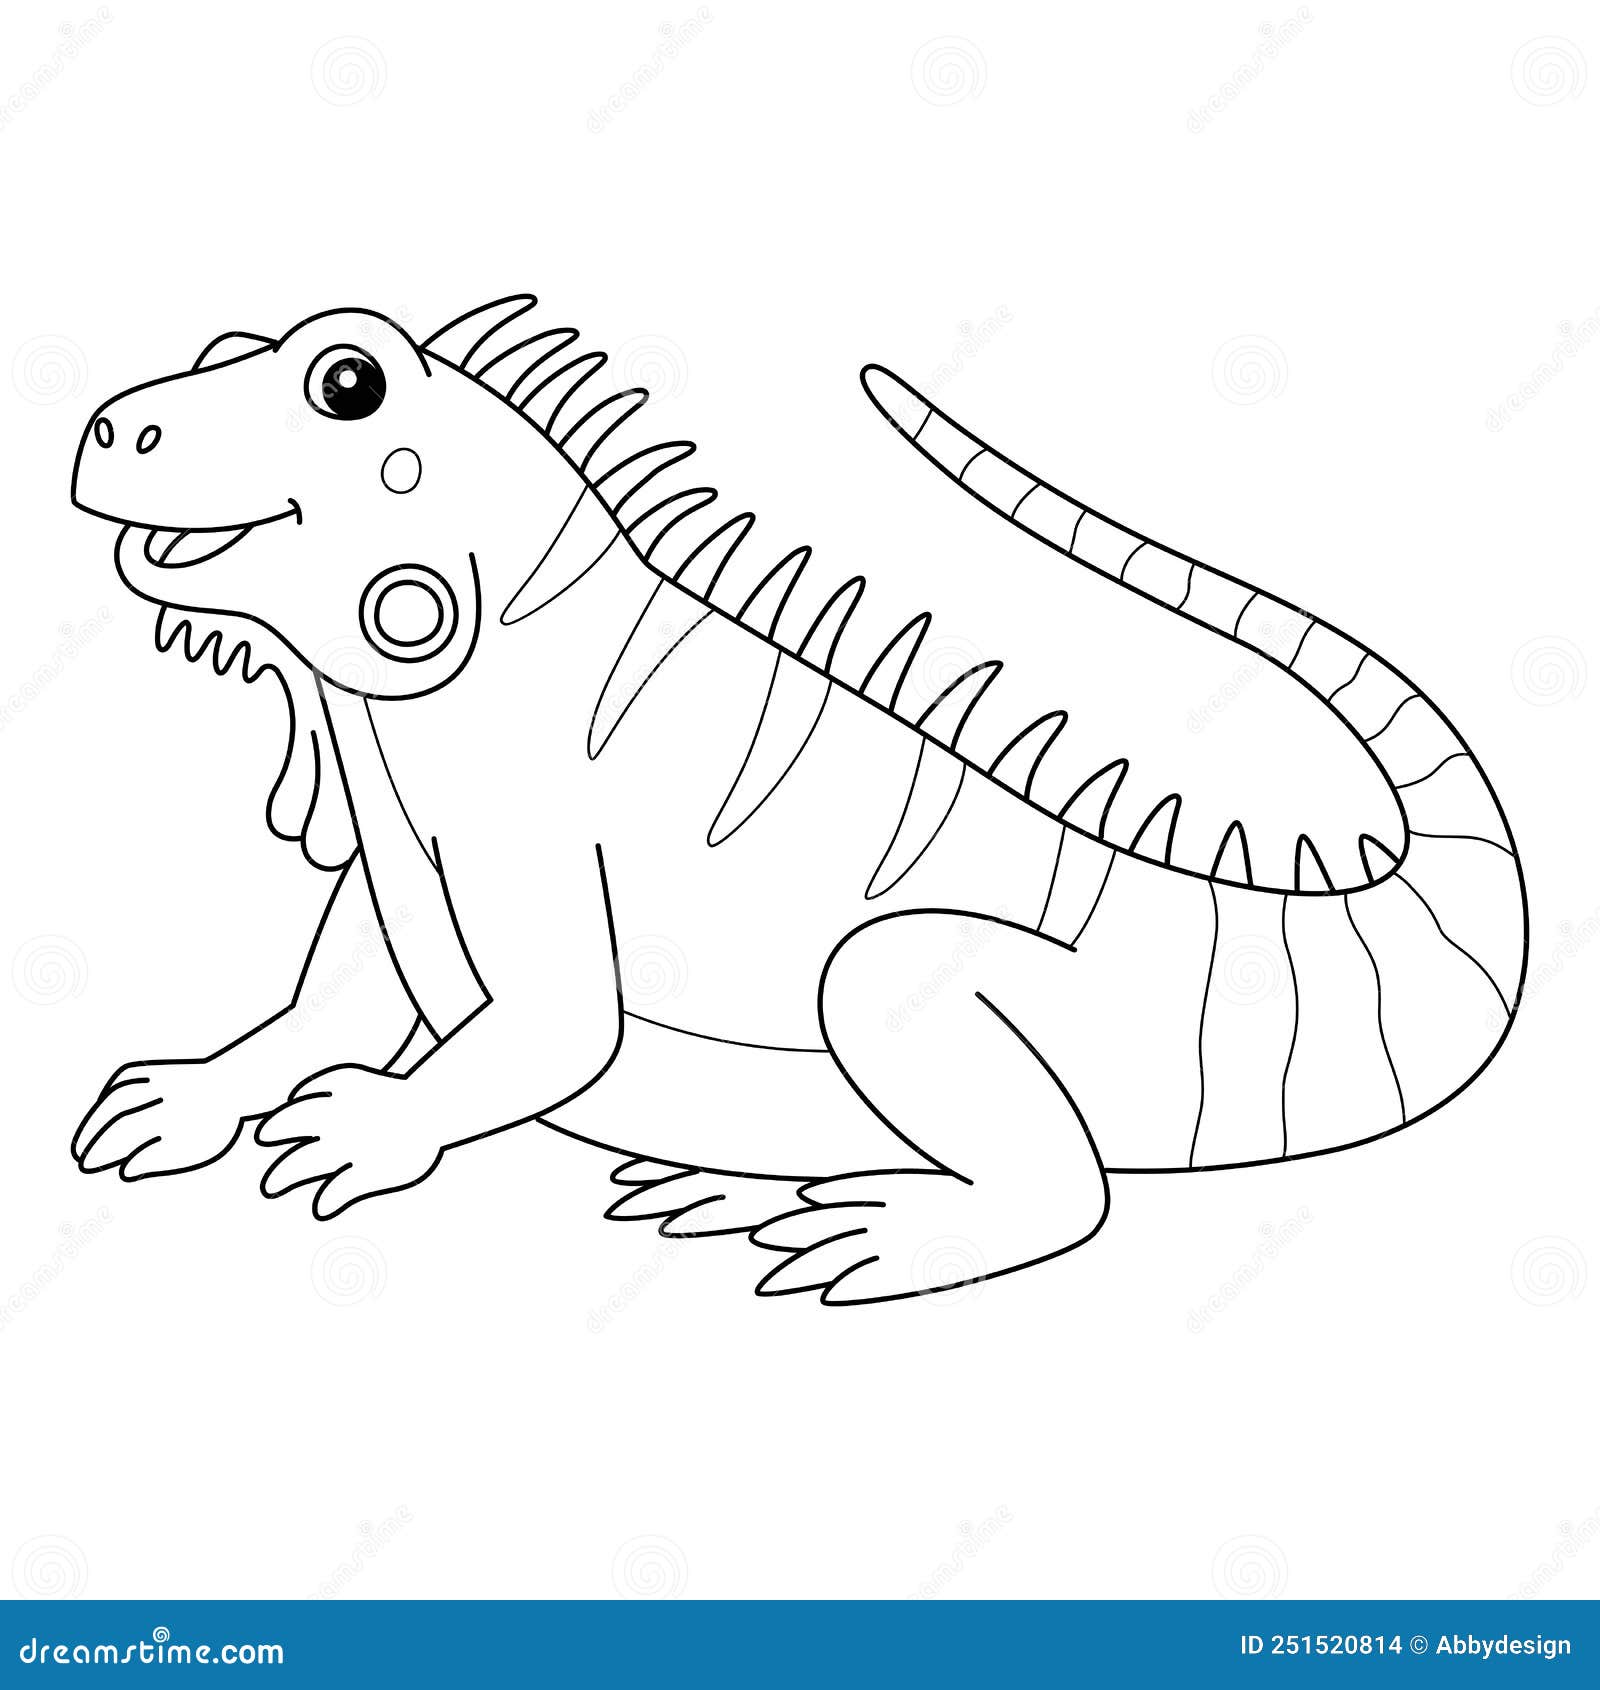 iguana animal coloring page for kids